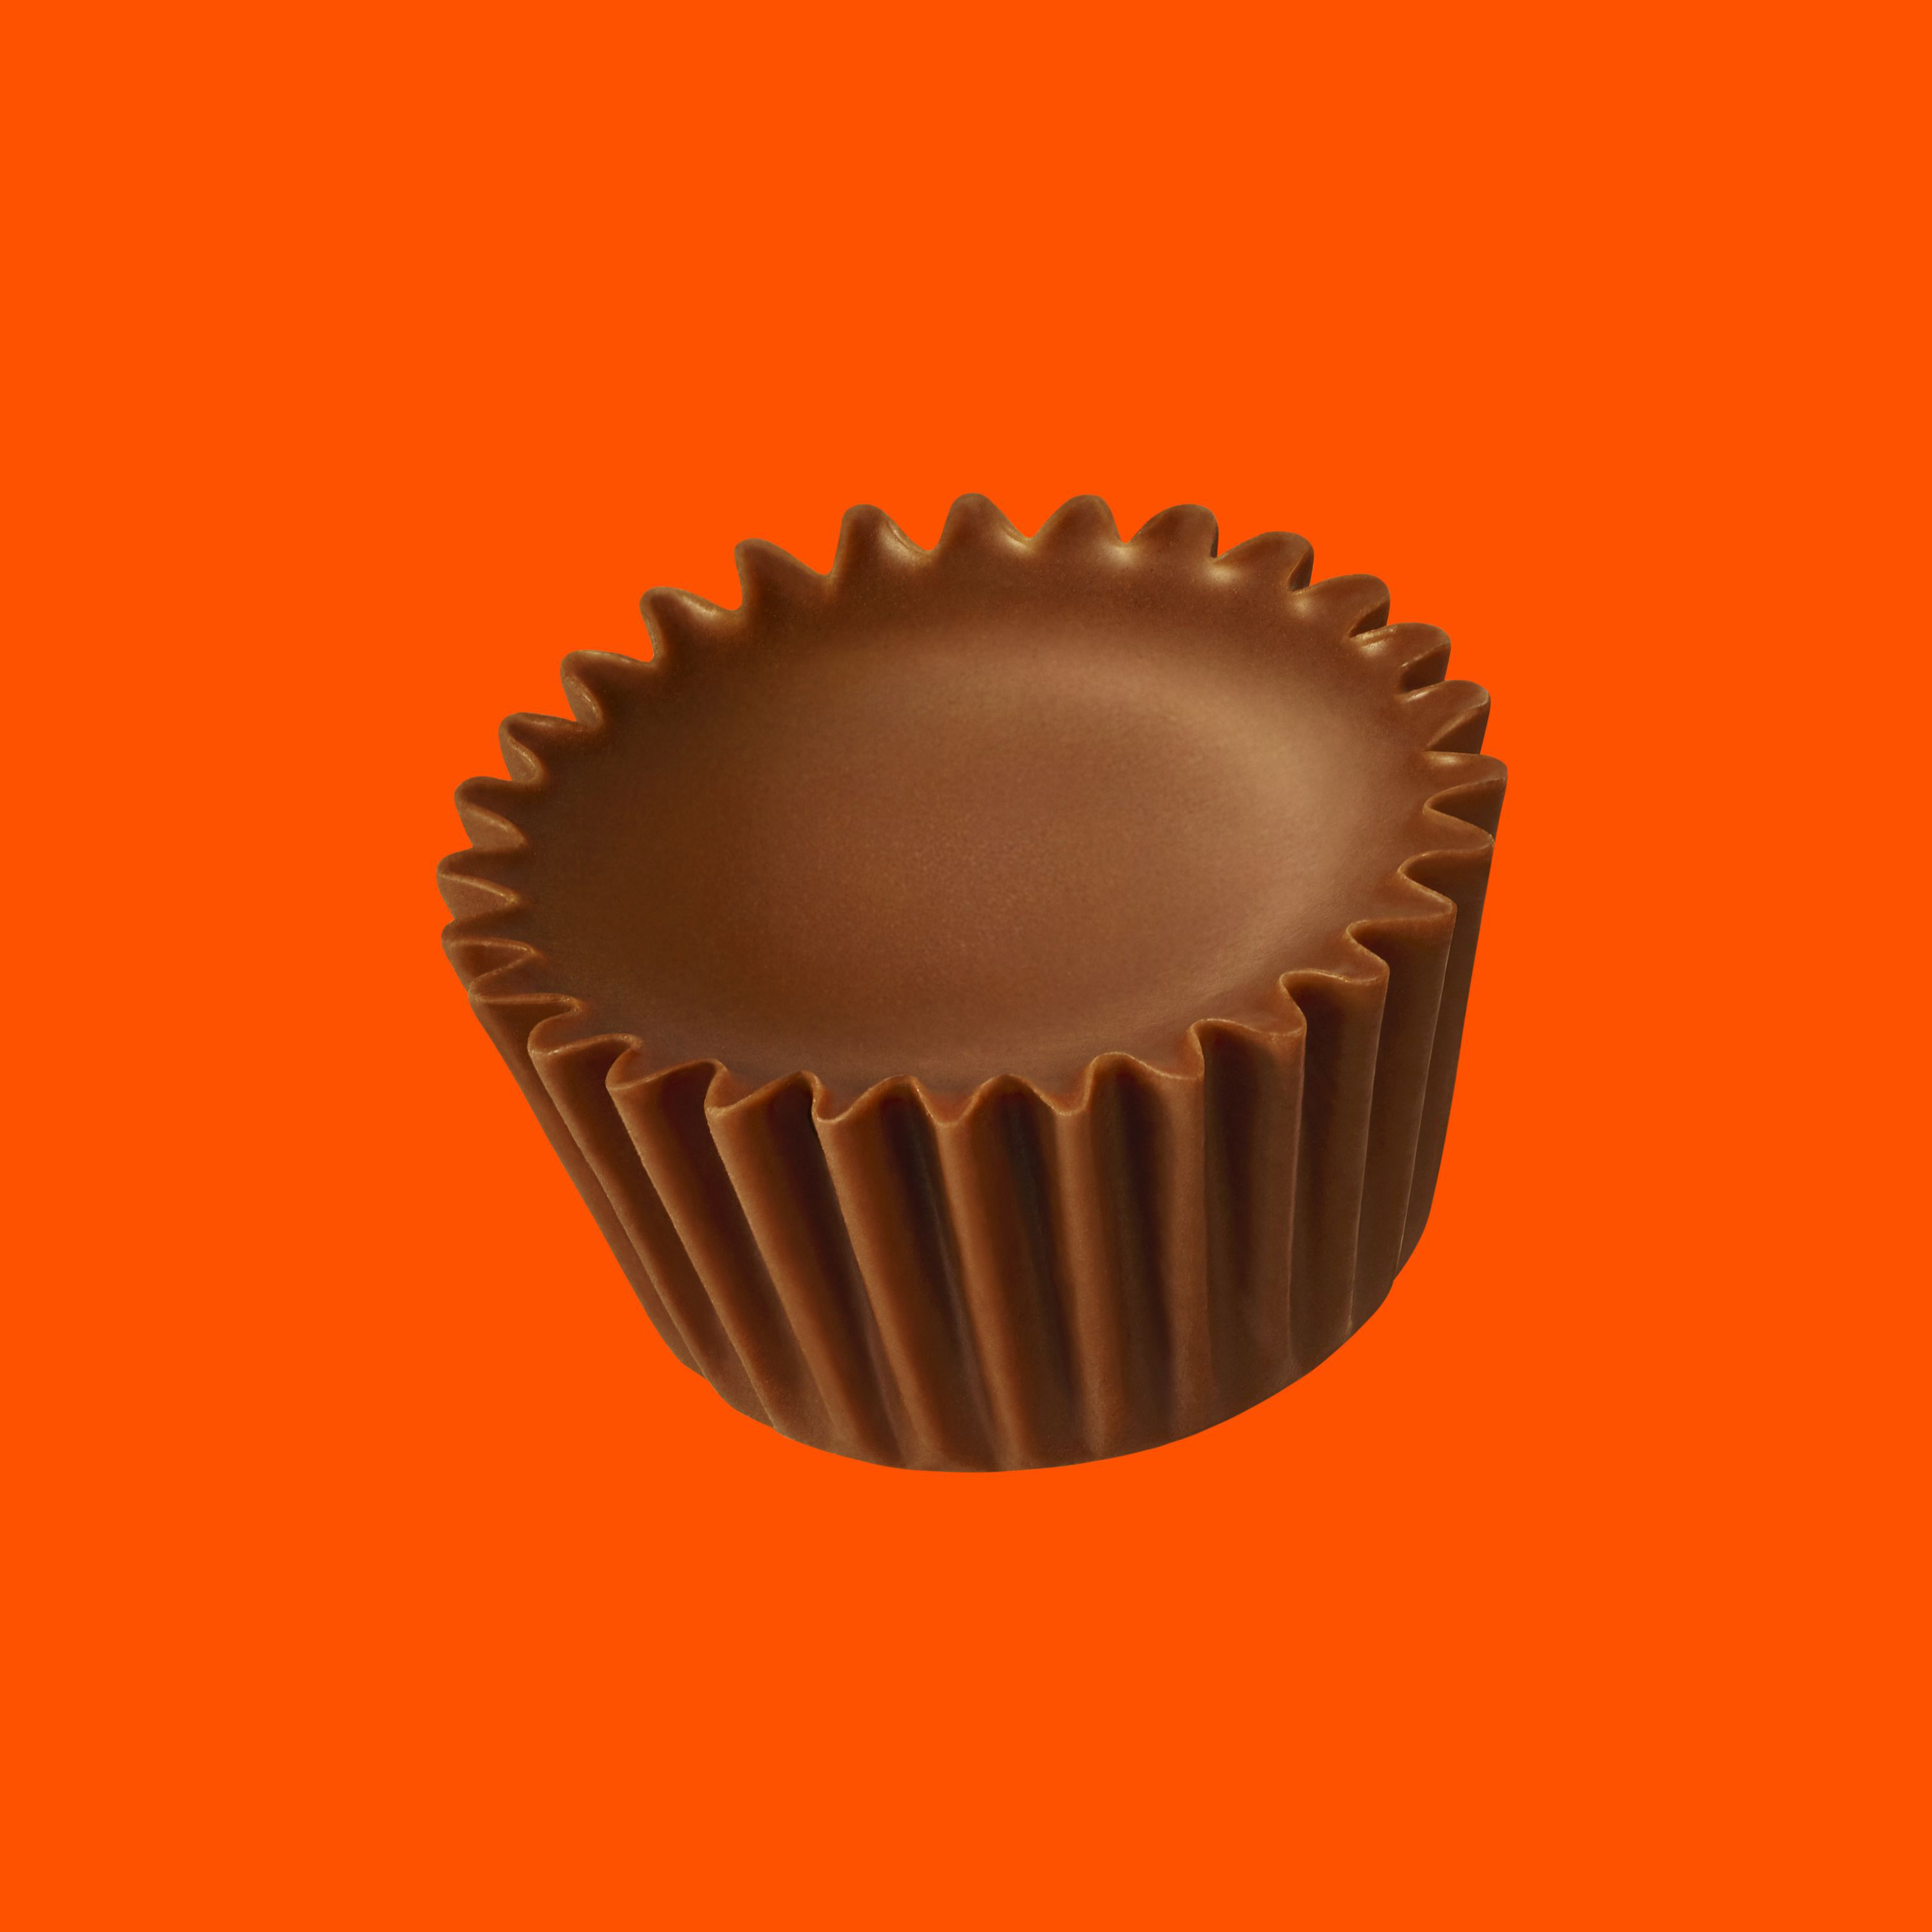 REESE'S Miniatures Milk Chocolate Peanut Butter Cups Candy, Bulk Candy, 36 oz, Bag - image 3 of 6